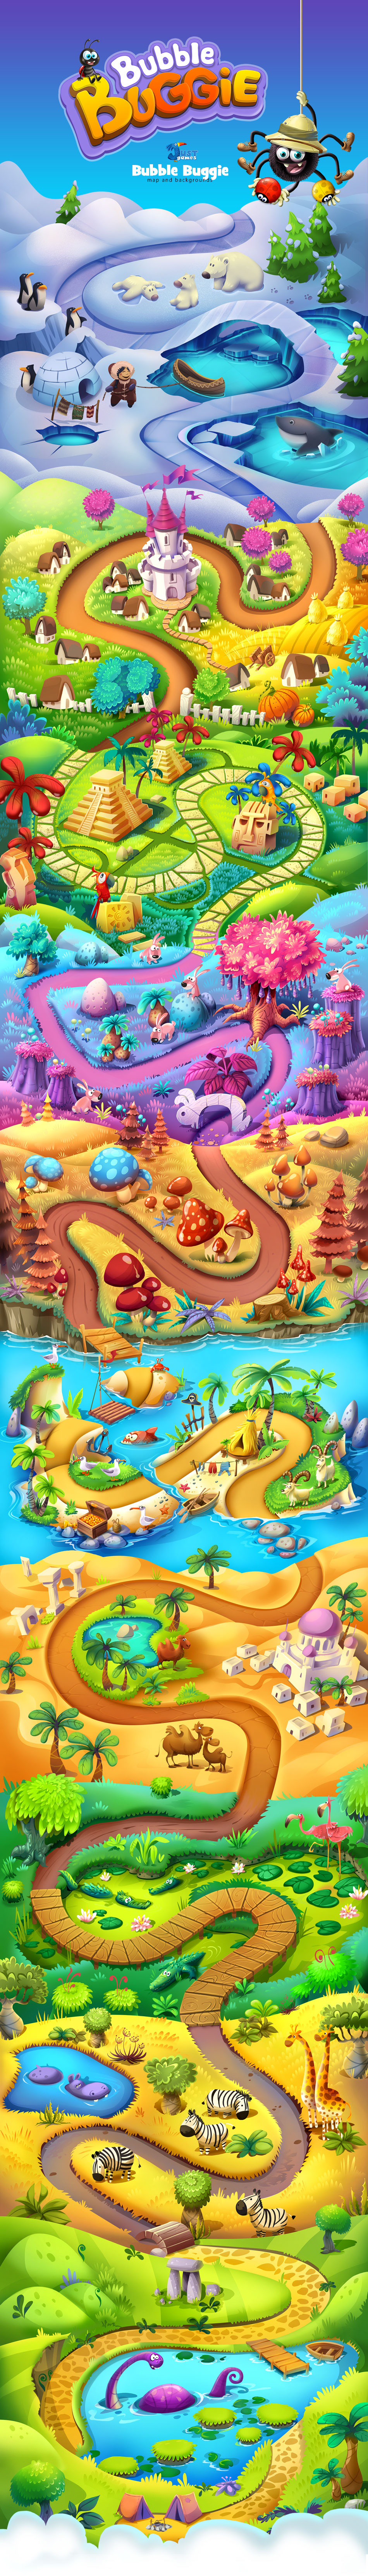 Bubble buggie bubble Shooter game map background cute spider mobile